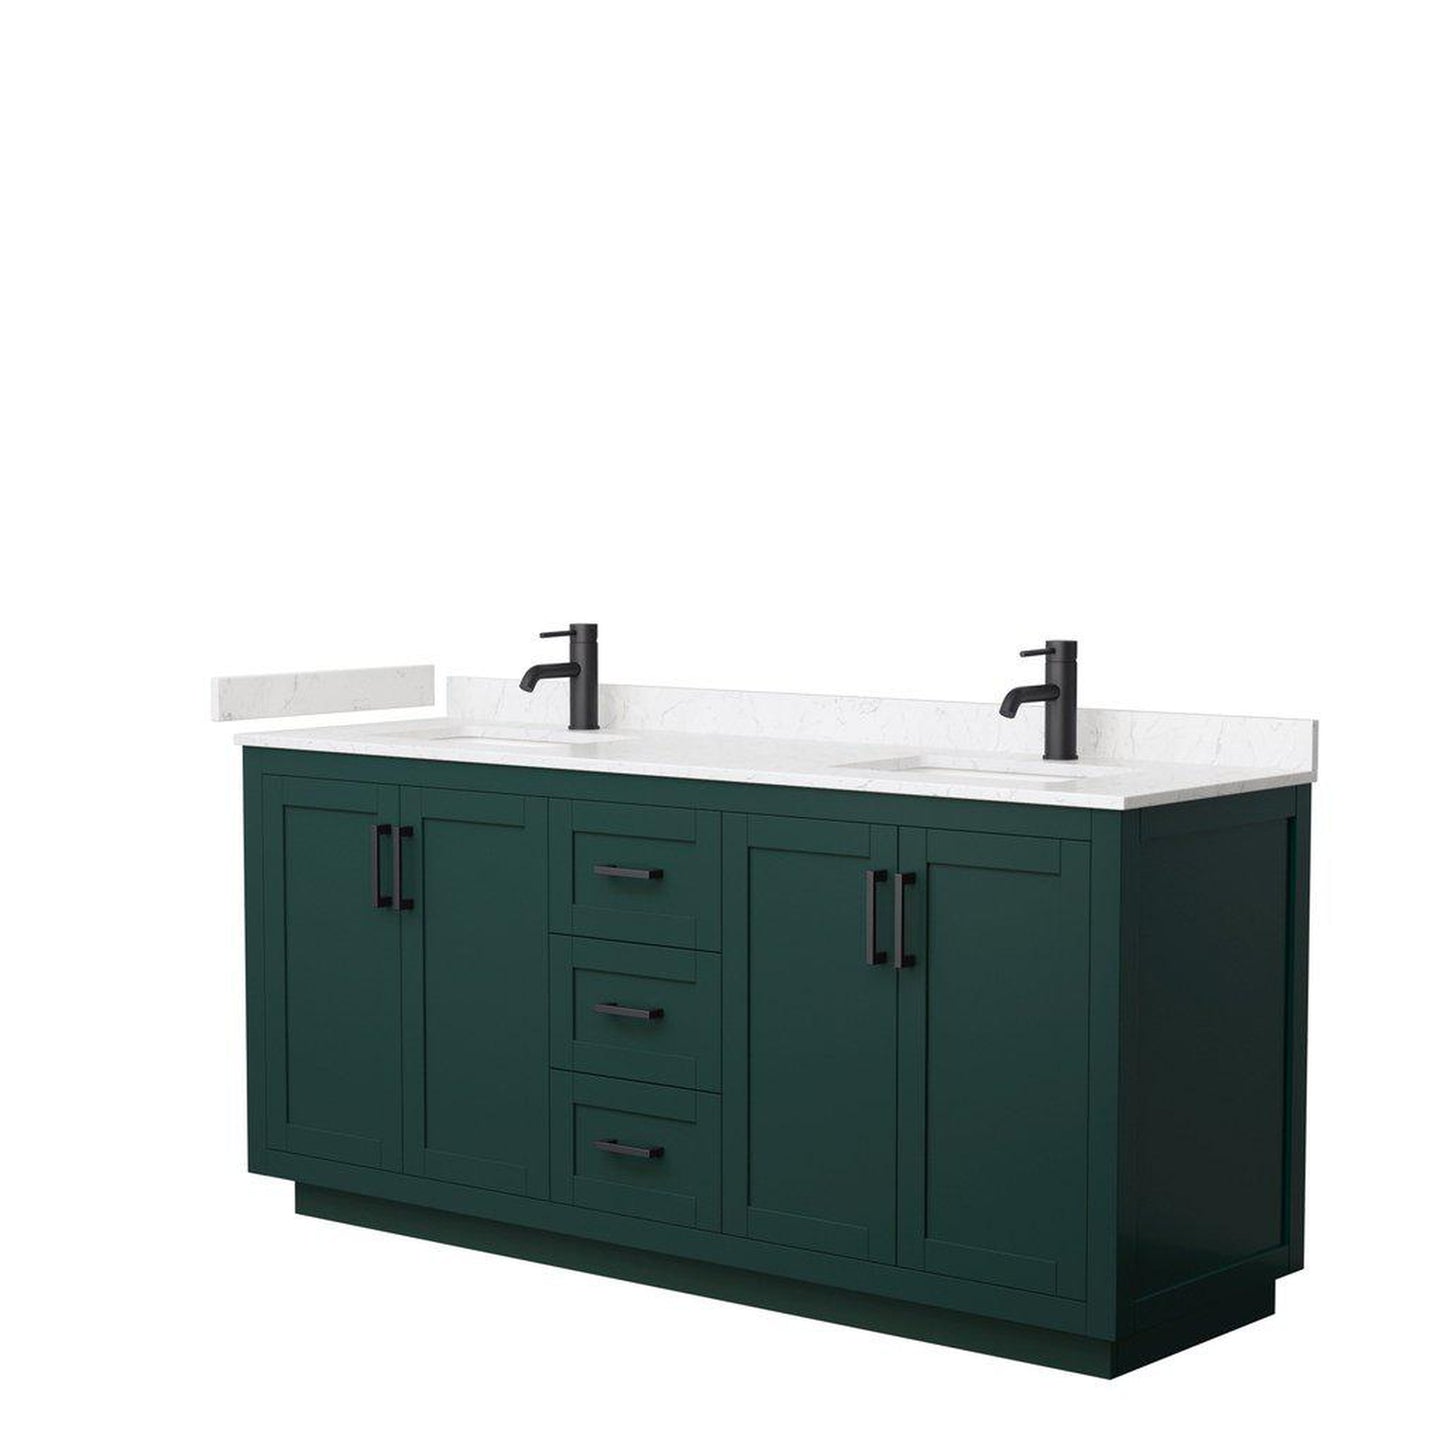 Wyndham Collection Miranda 72" Double Bathroom Green Vanity Set With Light-Vein Carrara Cultured Marble Countertop, Undermount Square Sink, And Matte Black Trim